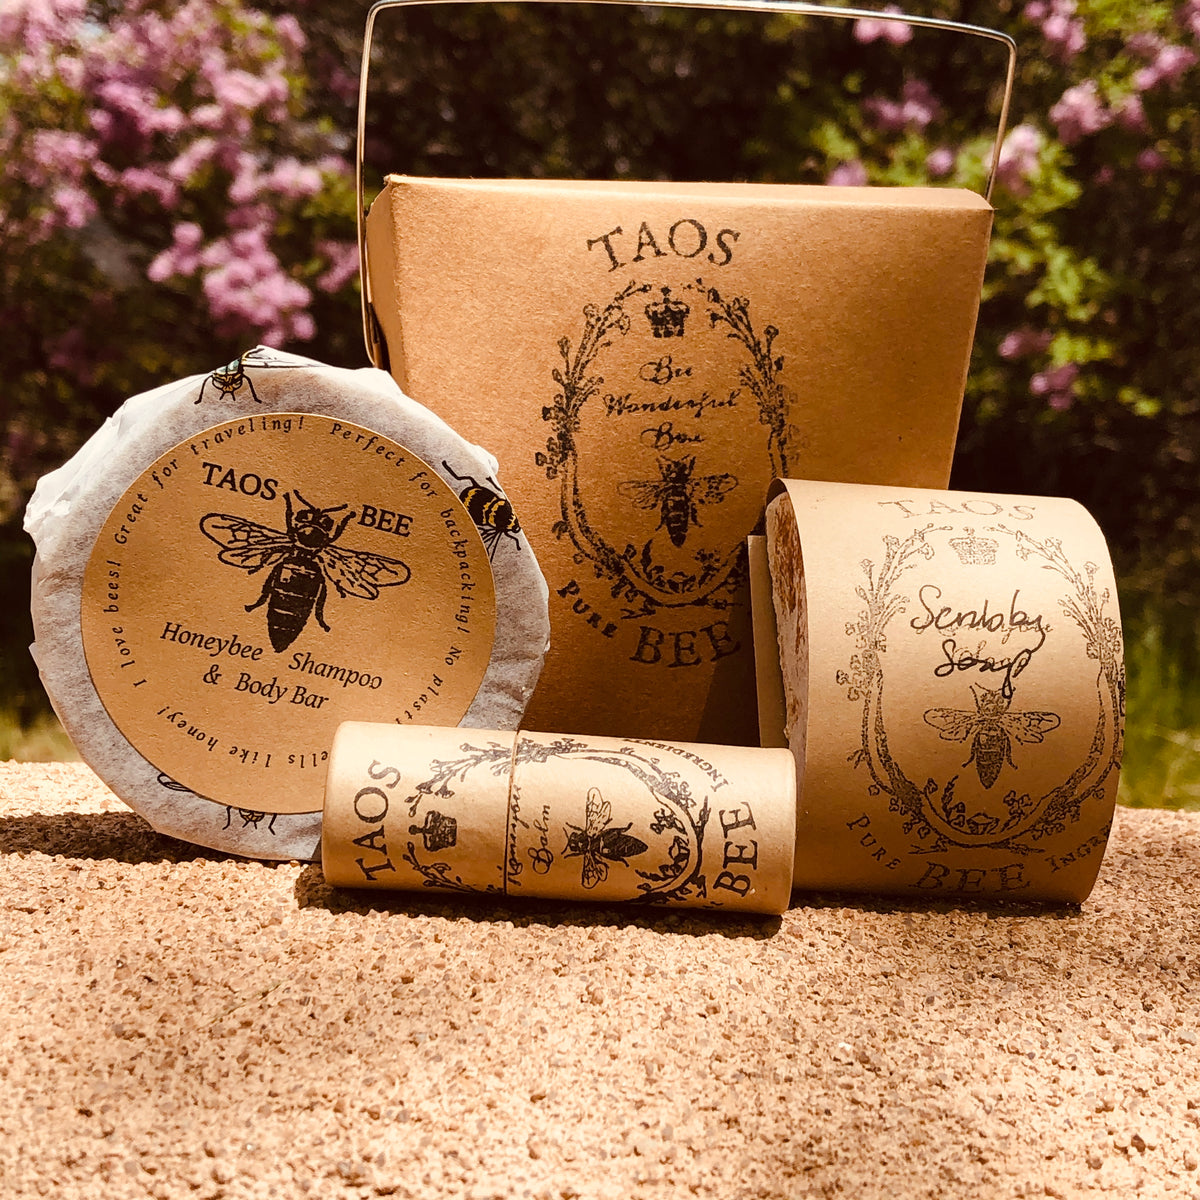 Taos Bee  Bee Wonderful Spa-Inspired Gift Box Set Filled with